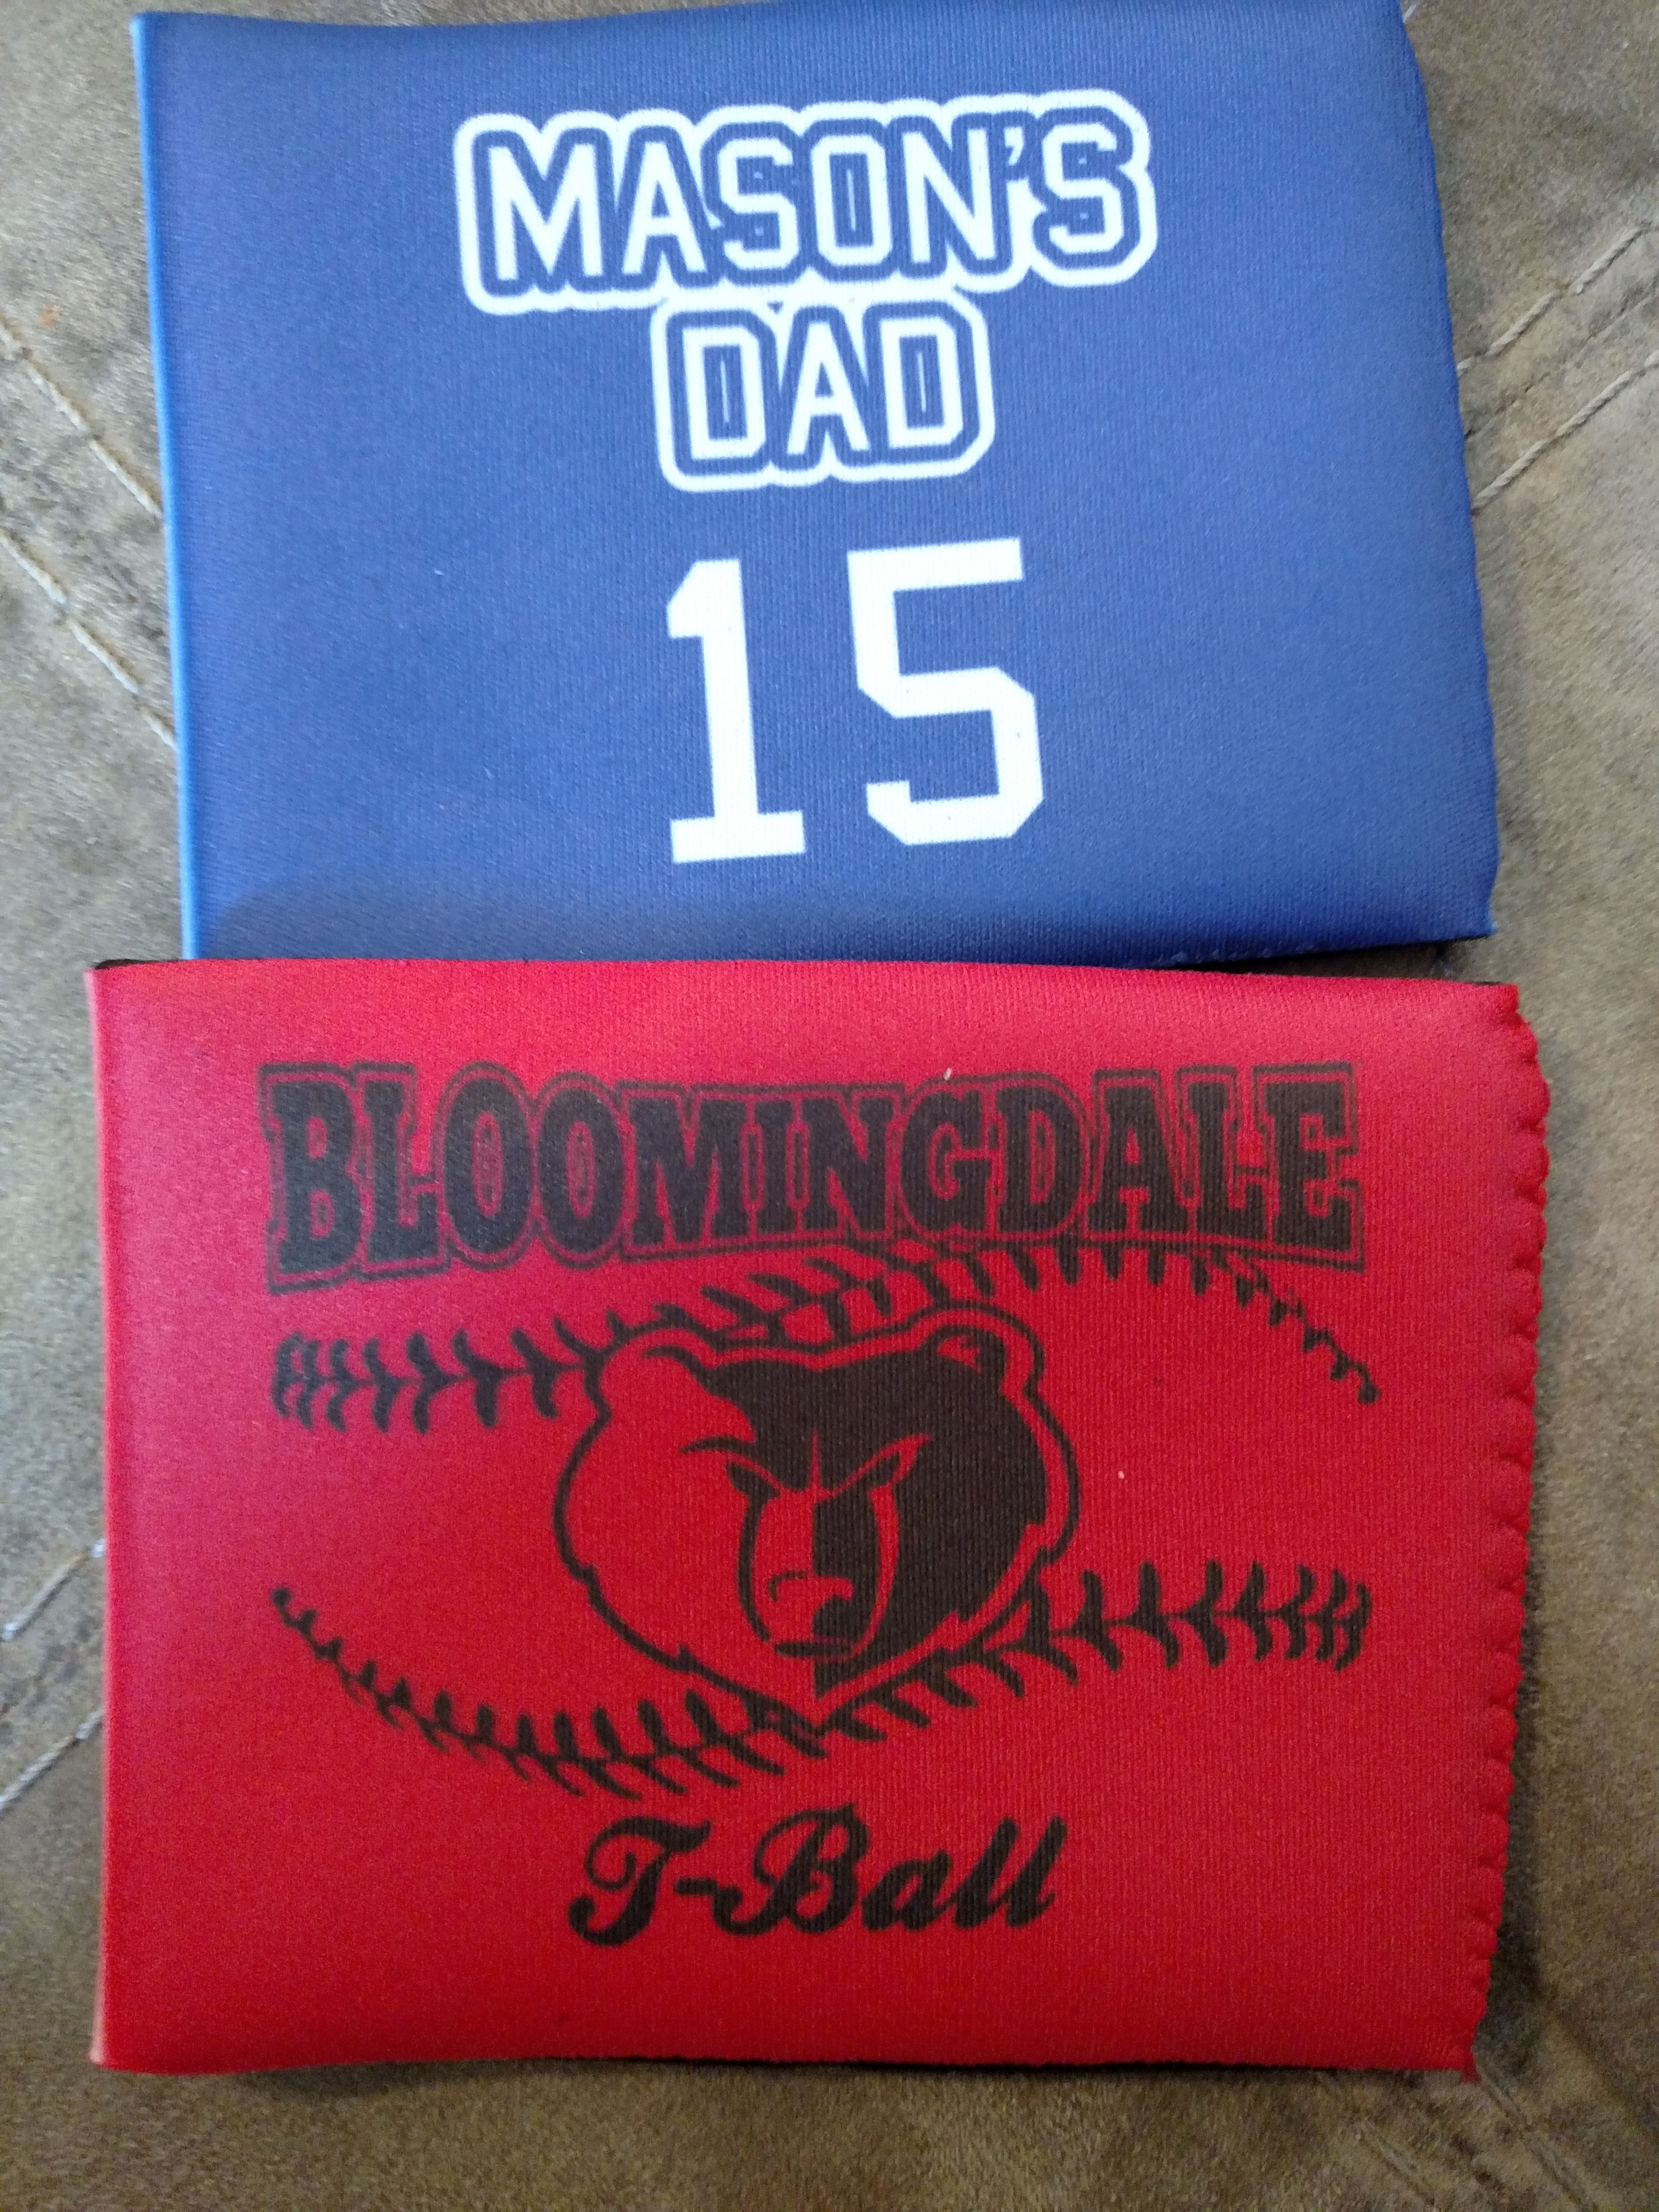 Tumbler koozies made with sublimation printing